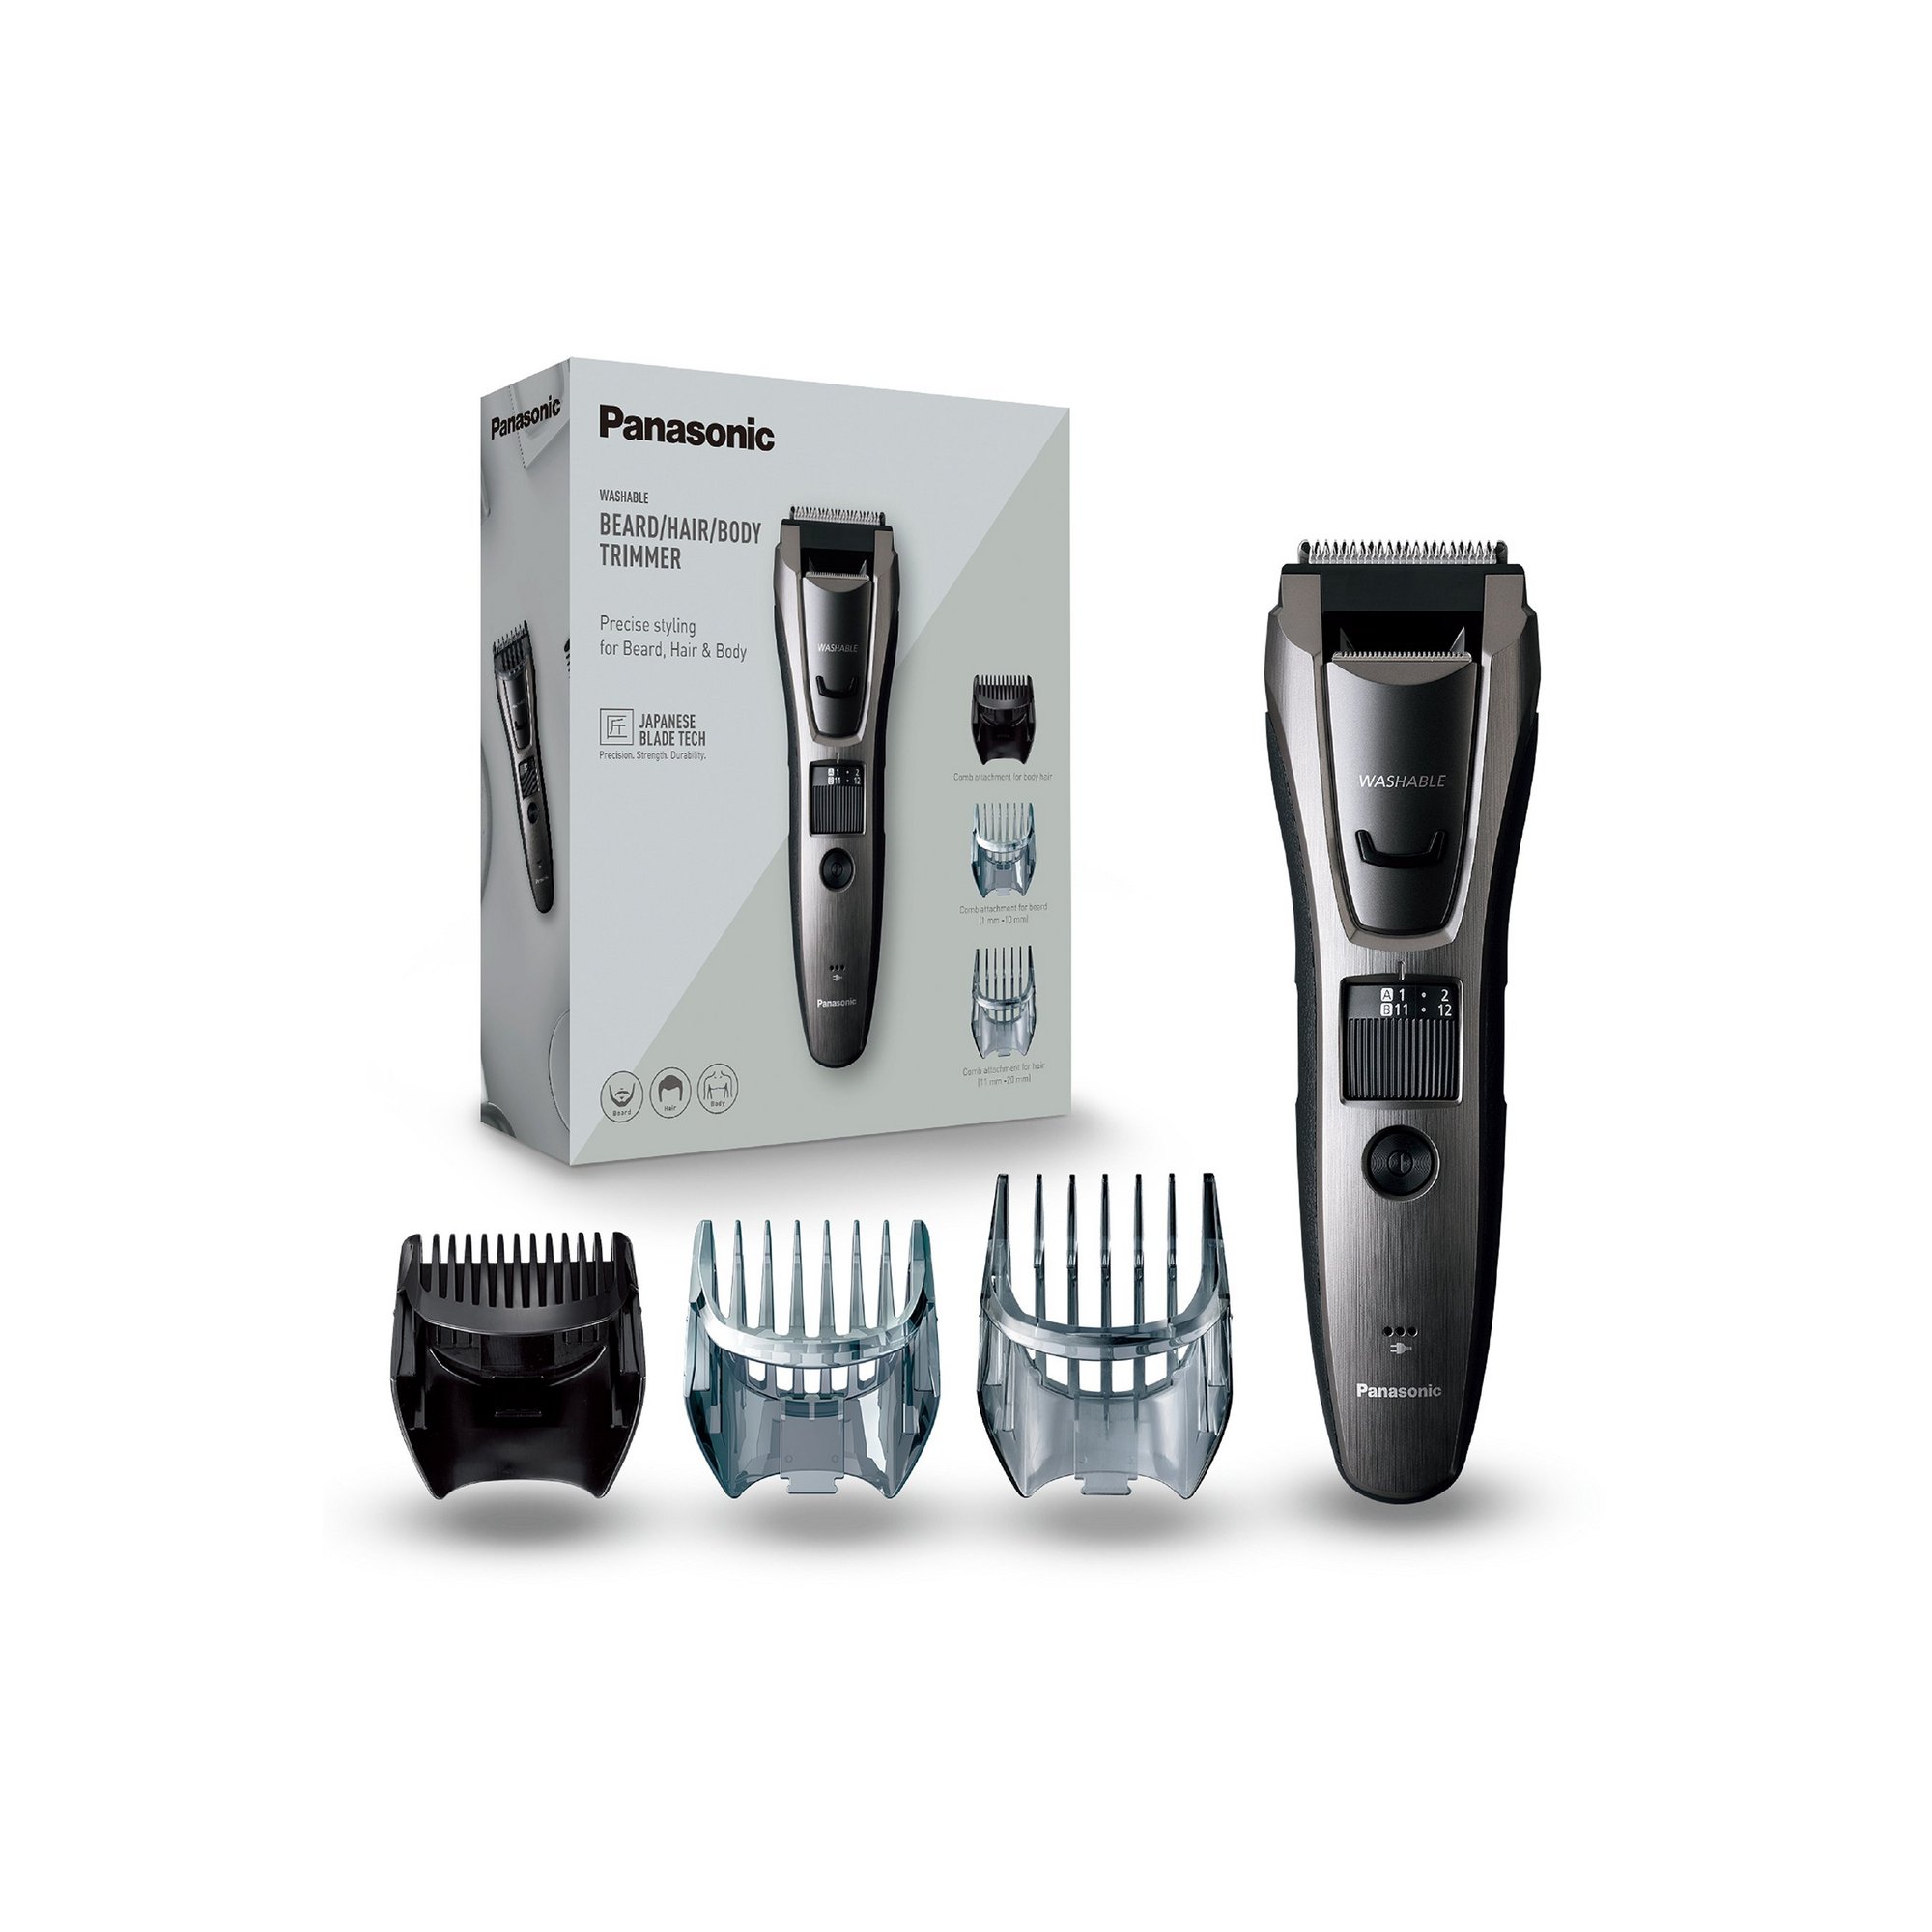 Panasonic All in One Cordless Beard, Hair and Body Trimmer